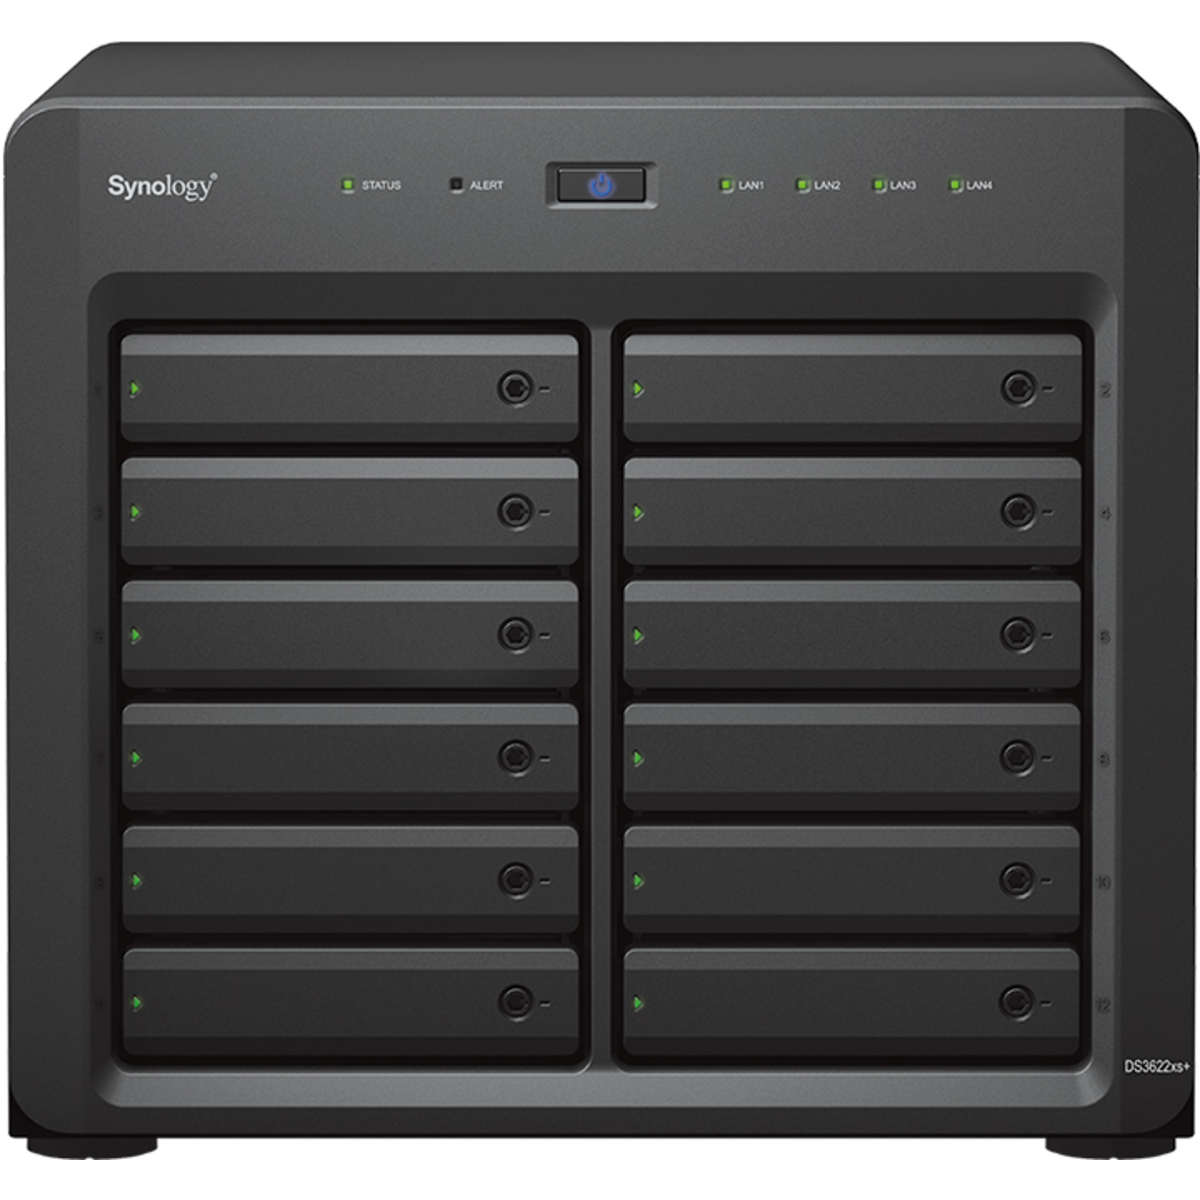 Synology DiskStation DS3622xs+ 10tb 12-Bay Desktop Multimedia / Power User / Business NAS - Network Attached Storage Device 10x1tb Crucial MX500 CT1000MX500SSD1 2.5 560/510MB/s SATA 6Gb/s SSD CONSUMER Class Drives Installed - Burn-In Tested DiskStation DS3622xs+